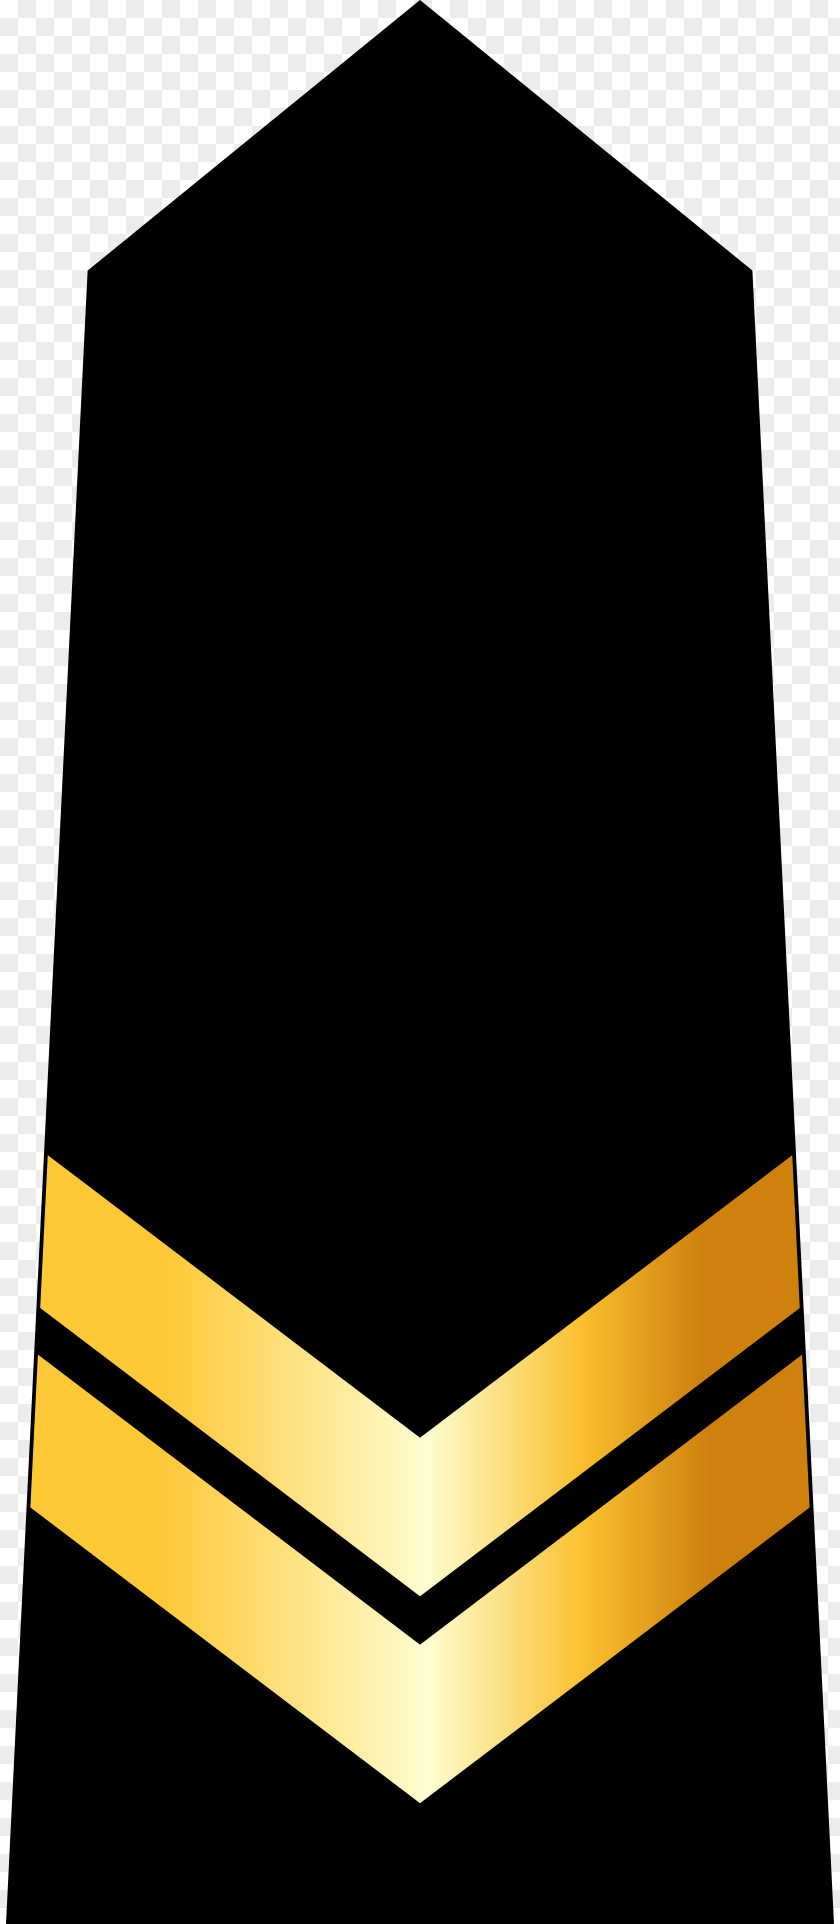 Army Tunisian Armed Forces Military Rank Sergeant PNG